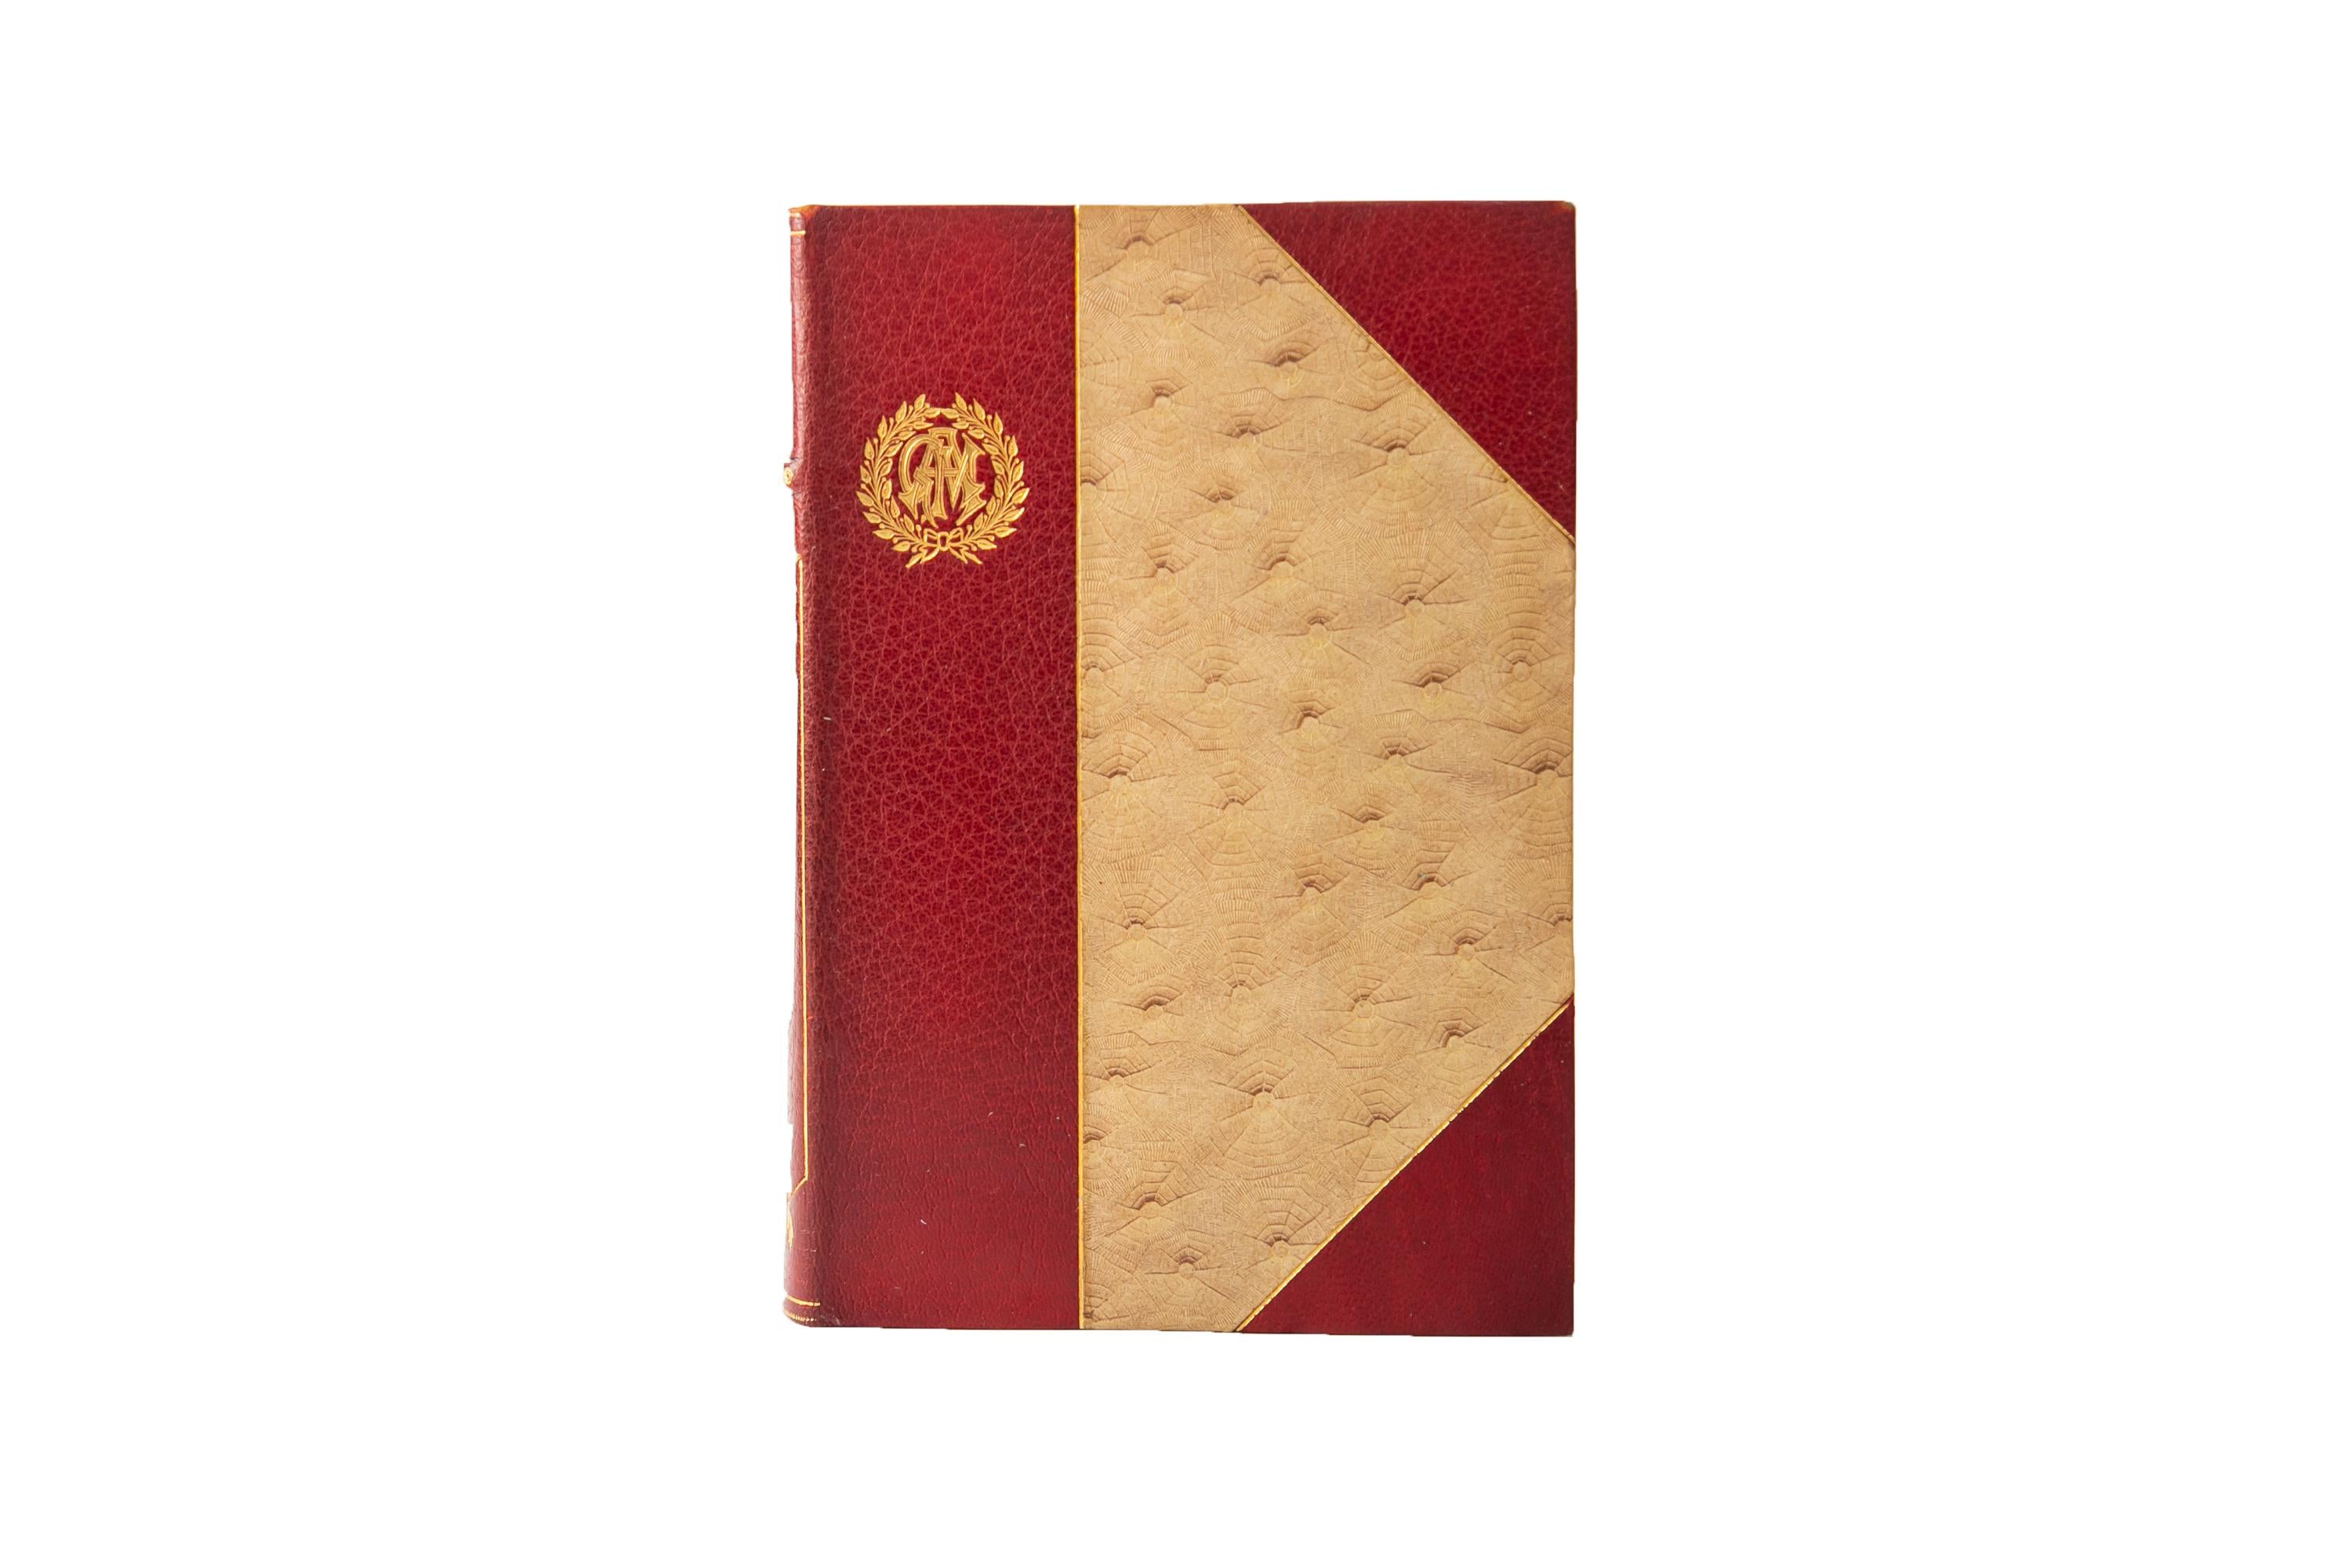 10 volumes. George Eliot, The complete works. St. James Edition. Bound in 3/4 red morocco and textured linen boards, bordered in gilt tooling with a gilt-tooled crest on the top left corner of the covers. Raised bands with floral details and label